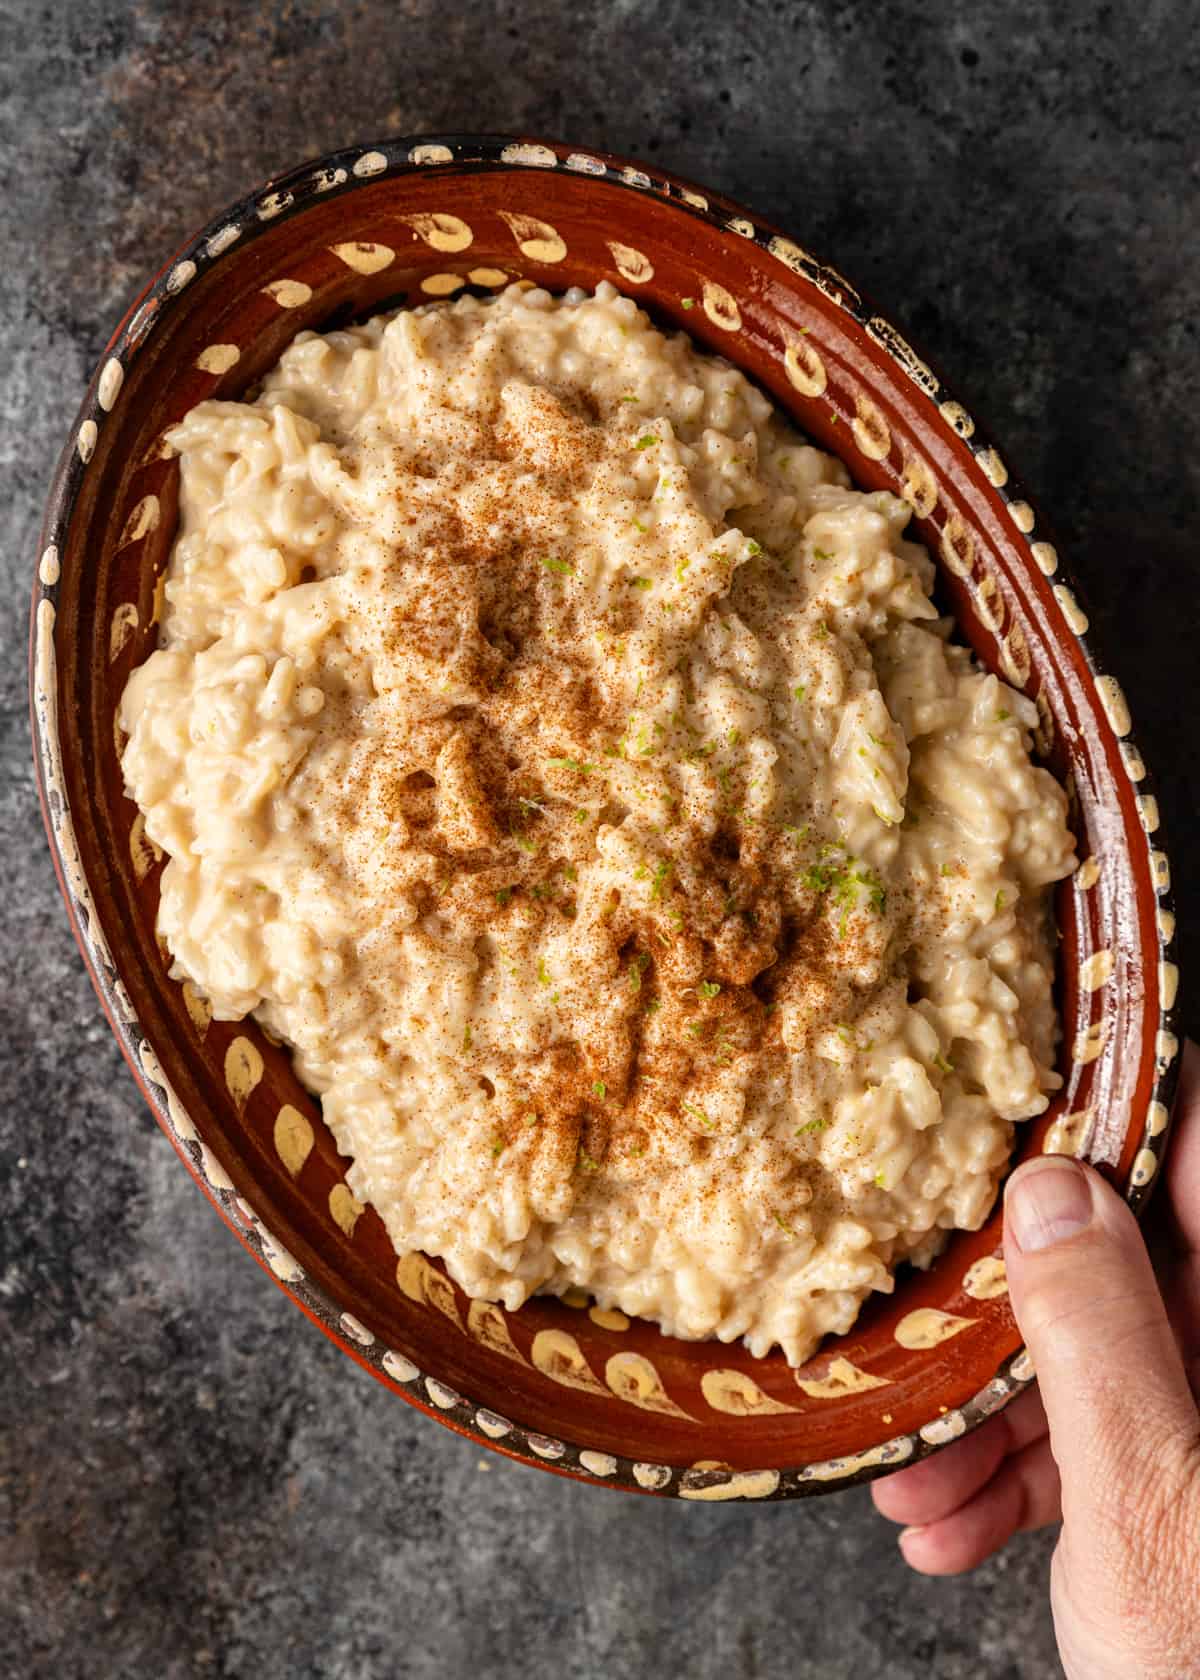 overhead: a hand holding a ceramic serving tray of Mexican rice pudding with allspice on top